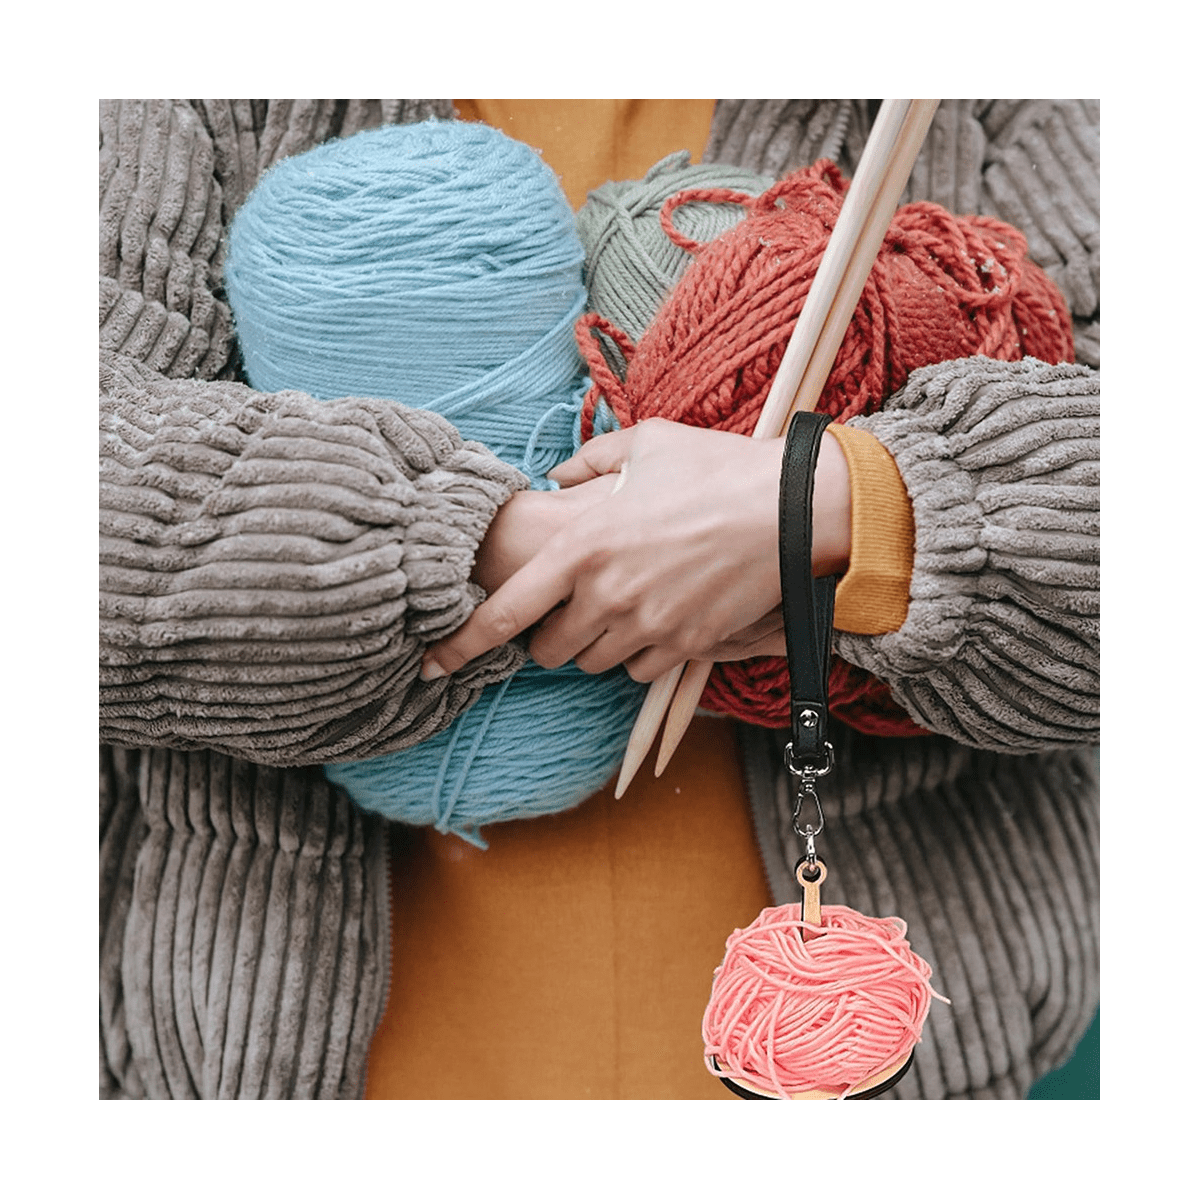 Stay Tangle-Free with Knituition's Wrist Yarn Holder